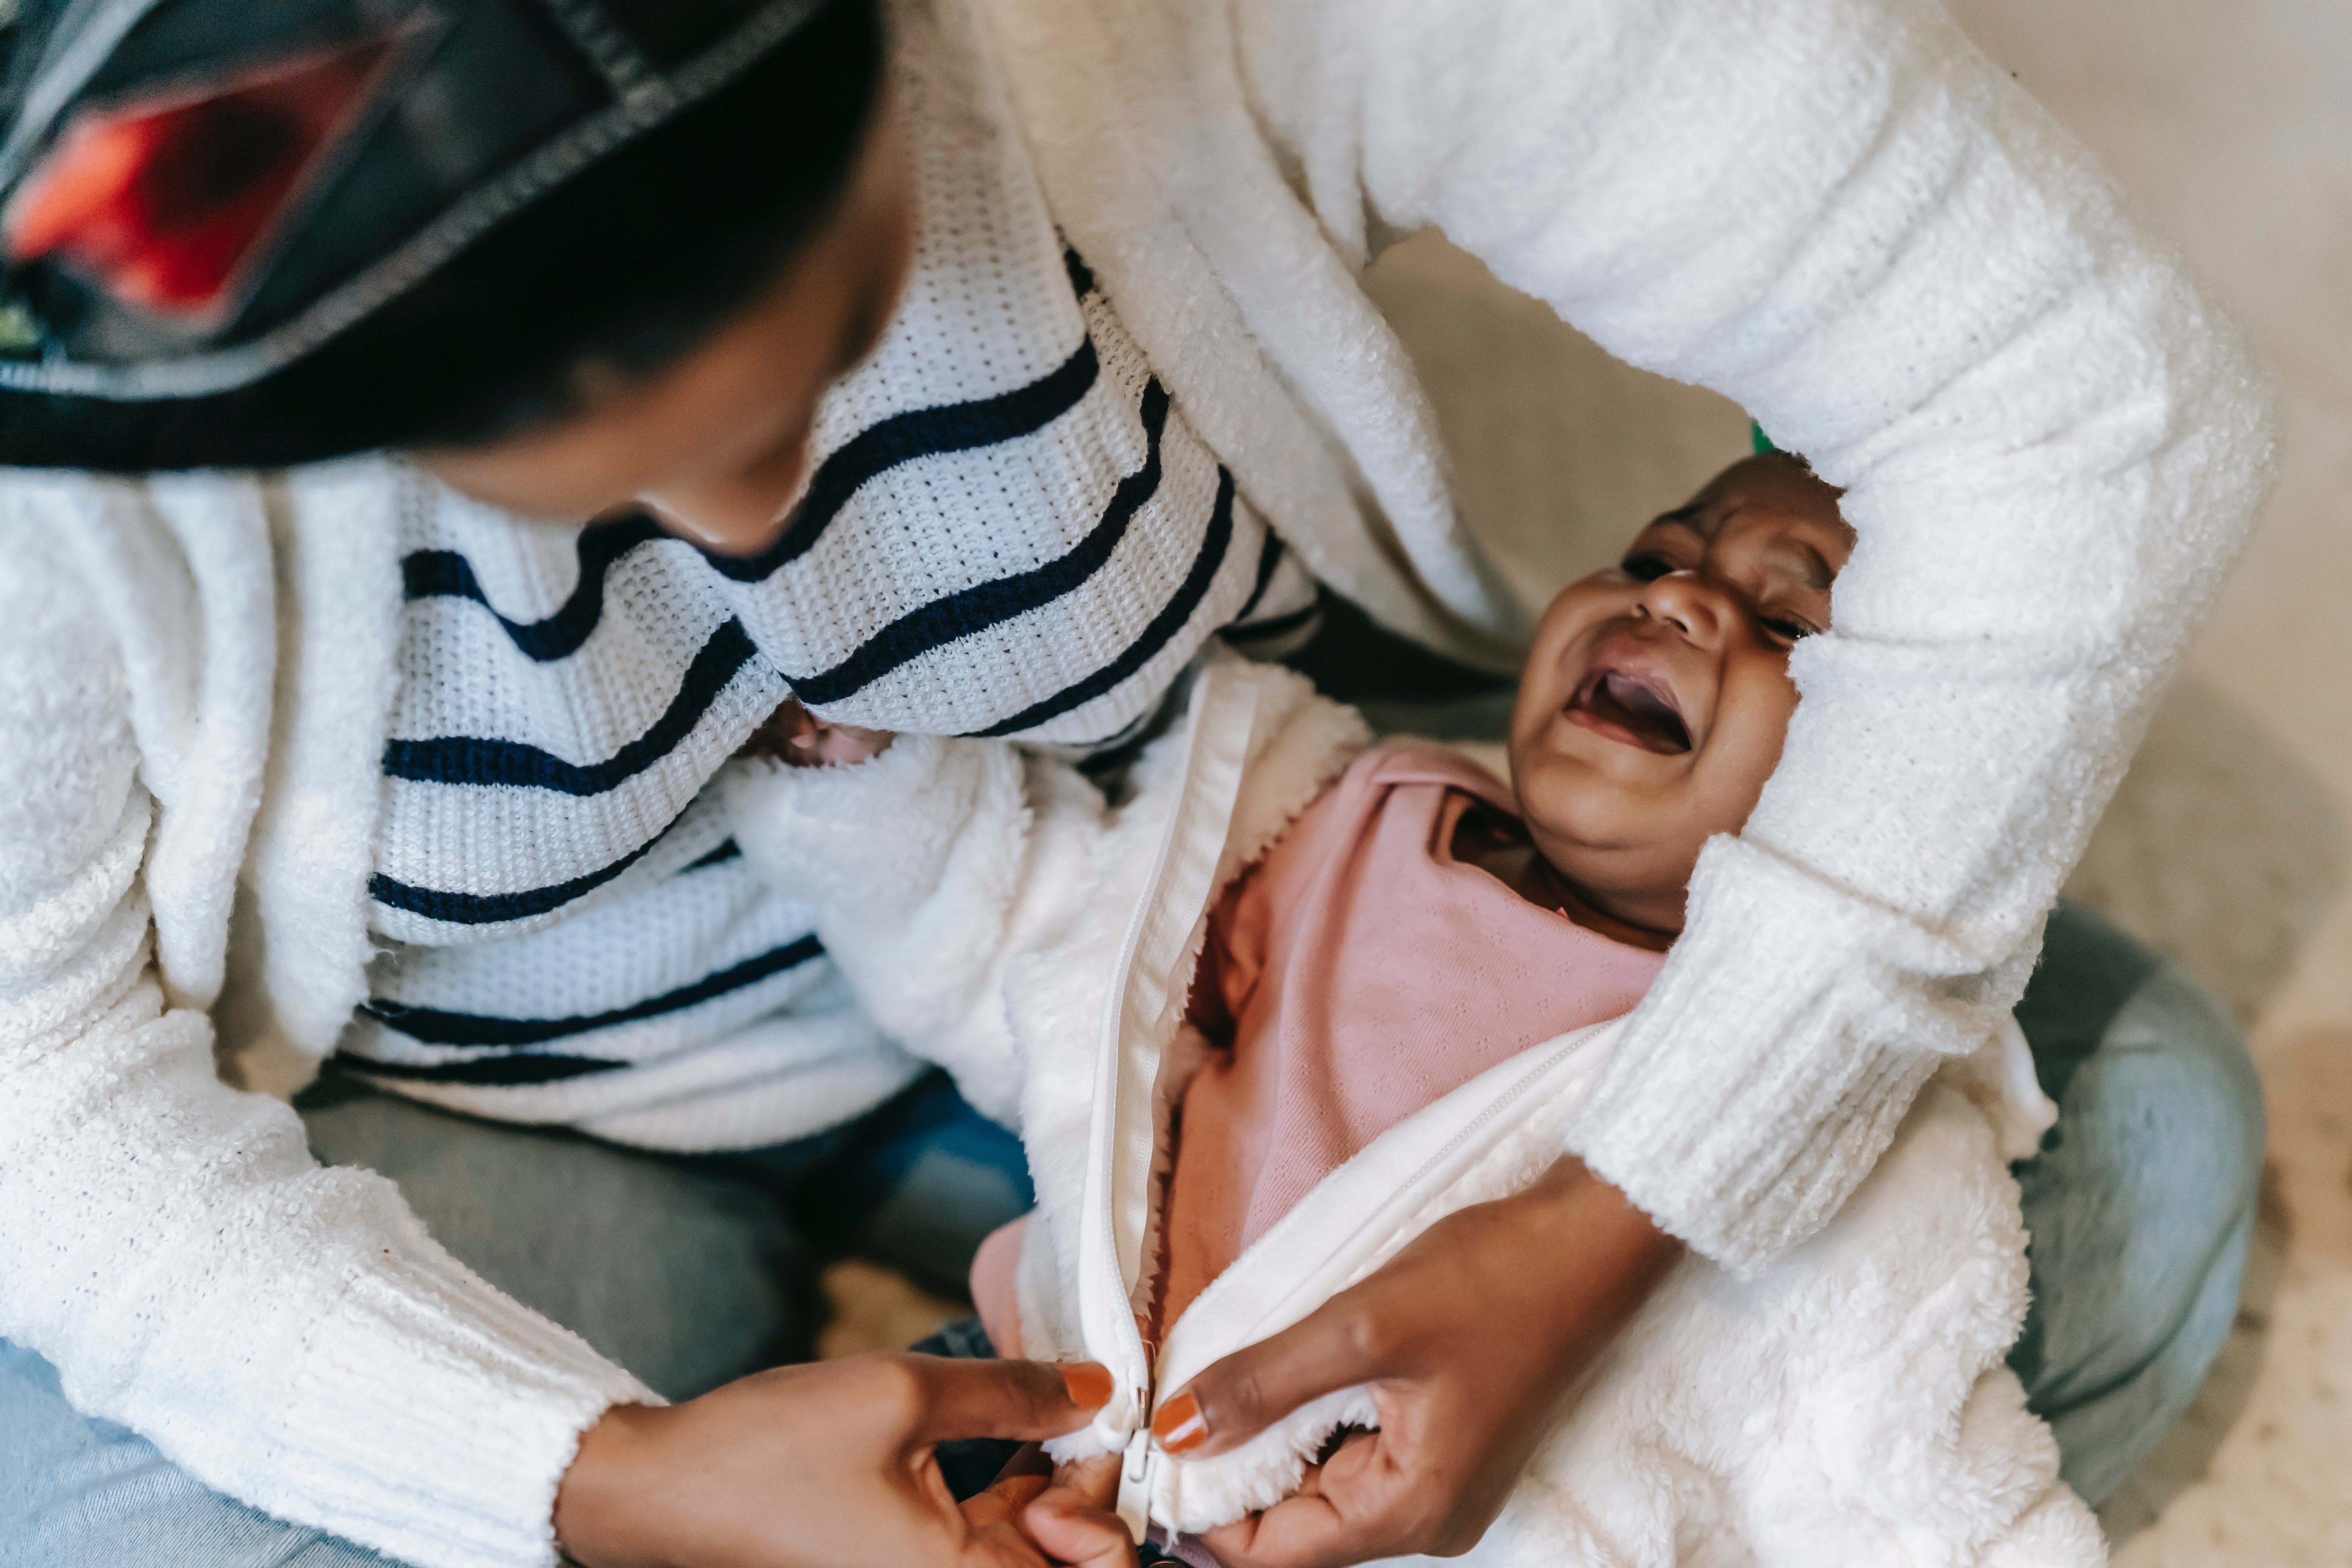 A woman and a sick child | Photo: Pexels